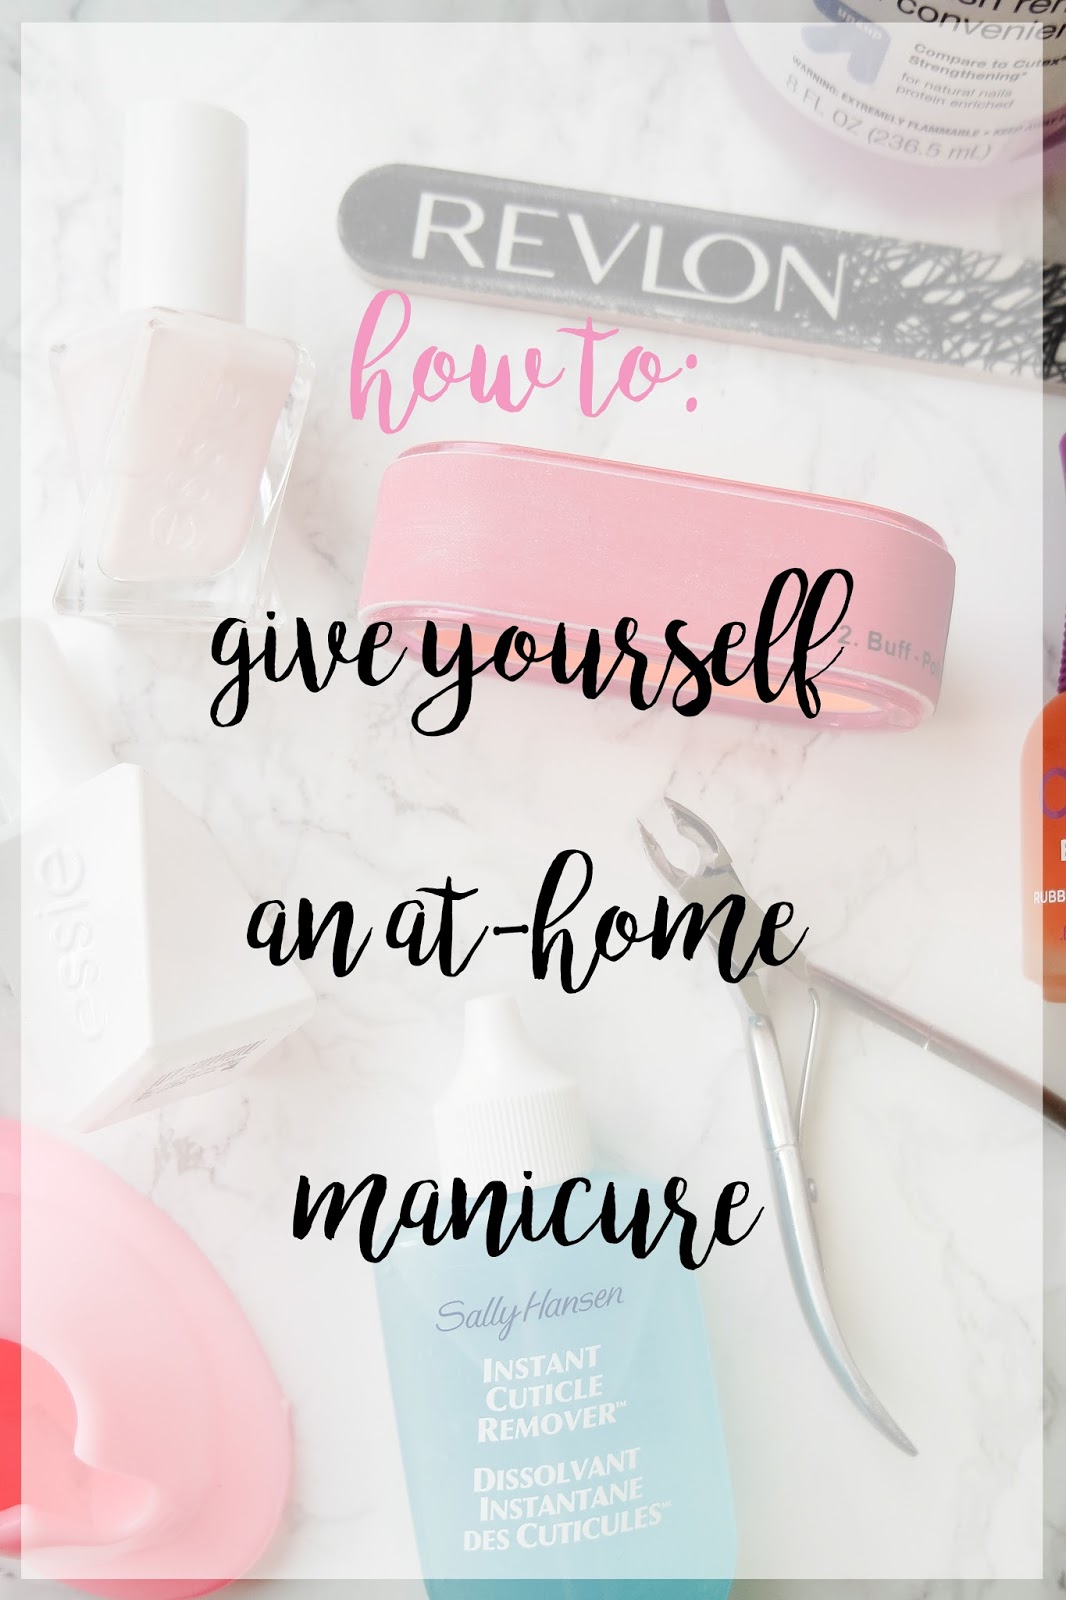 Franish: how to: do an at-home manicure